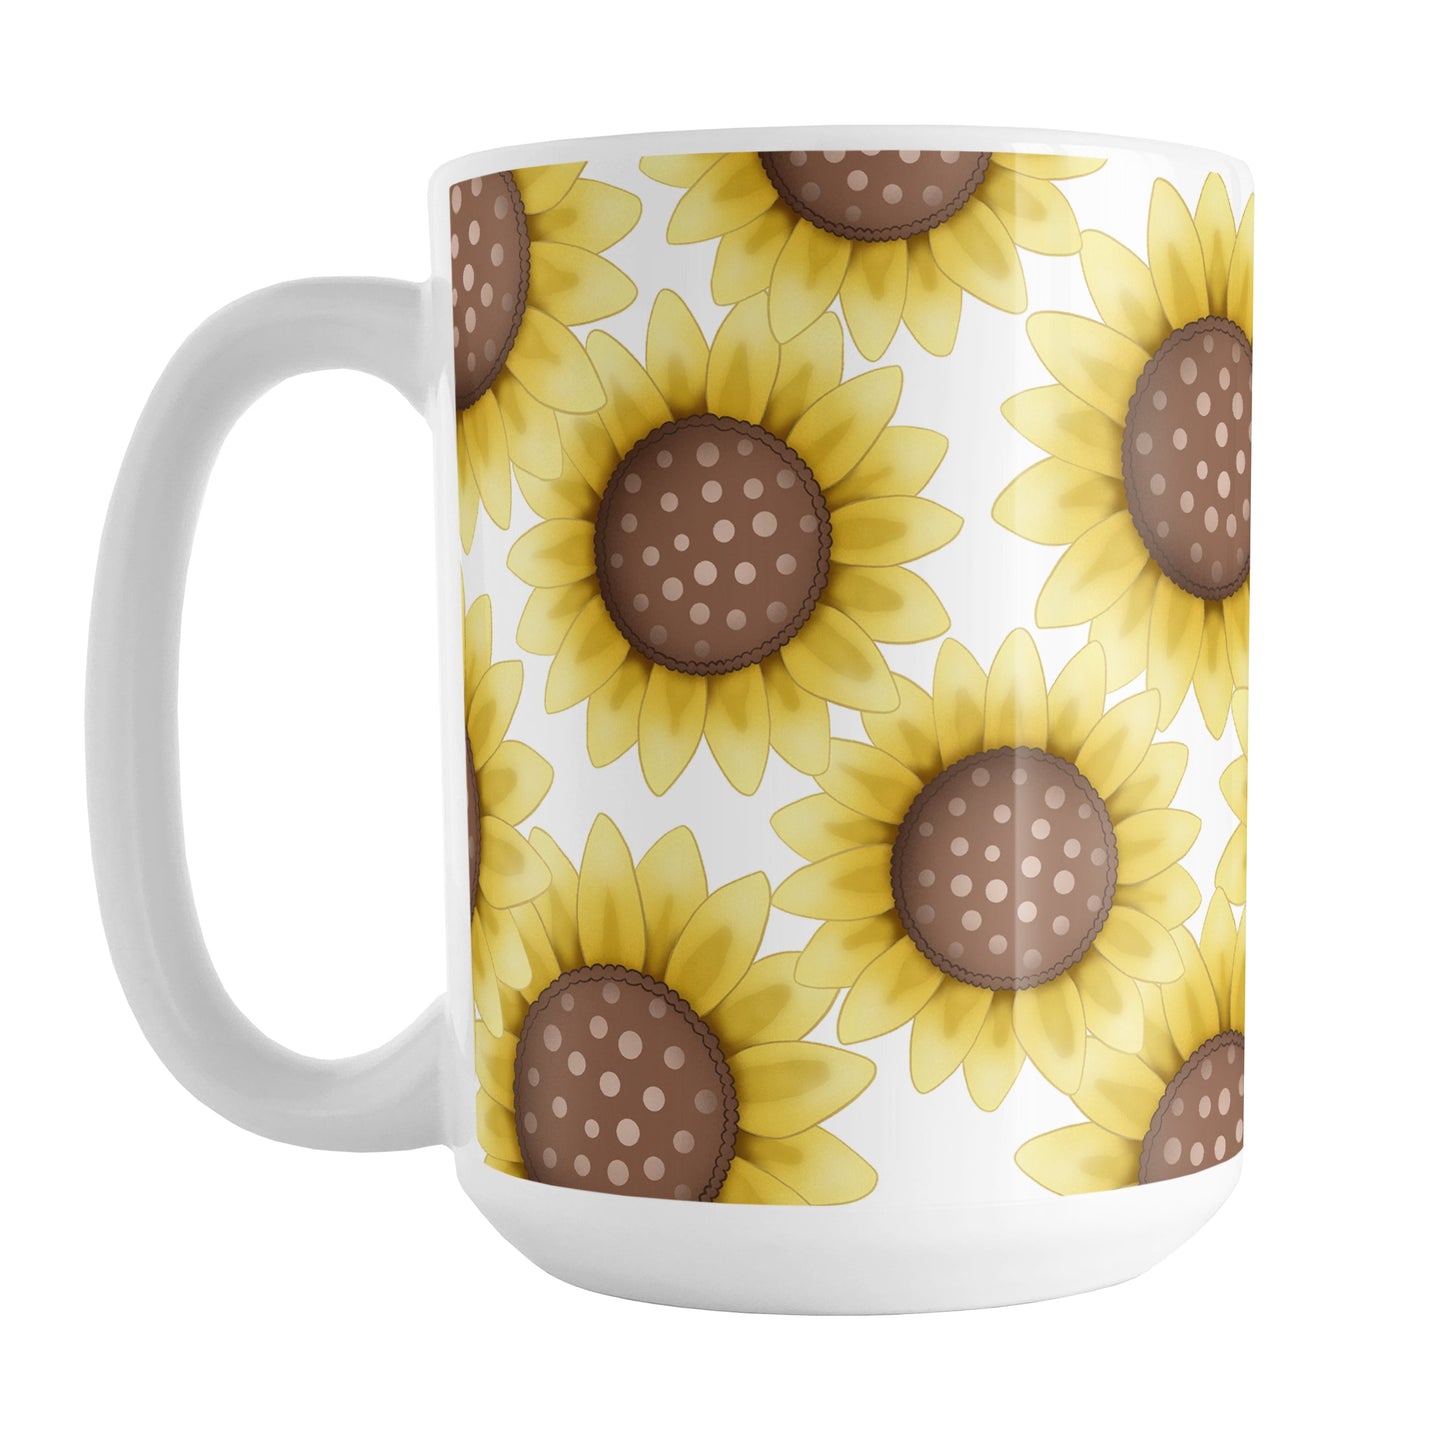 Sunflower Pattern Mug (15oz) at Amy's Coffee Mugs. A ceramic coffee mug designed with cute yellow sunflowers with dotted brown centers in a pattern that wraps around the mug to the handle.